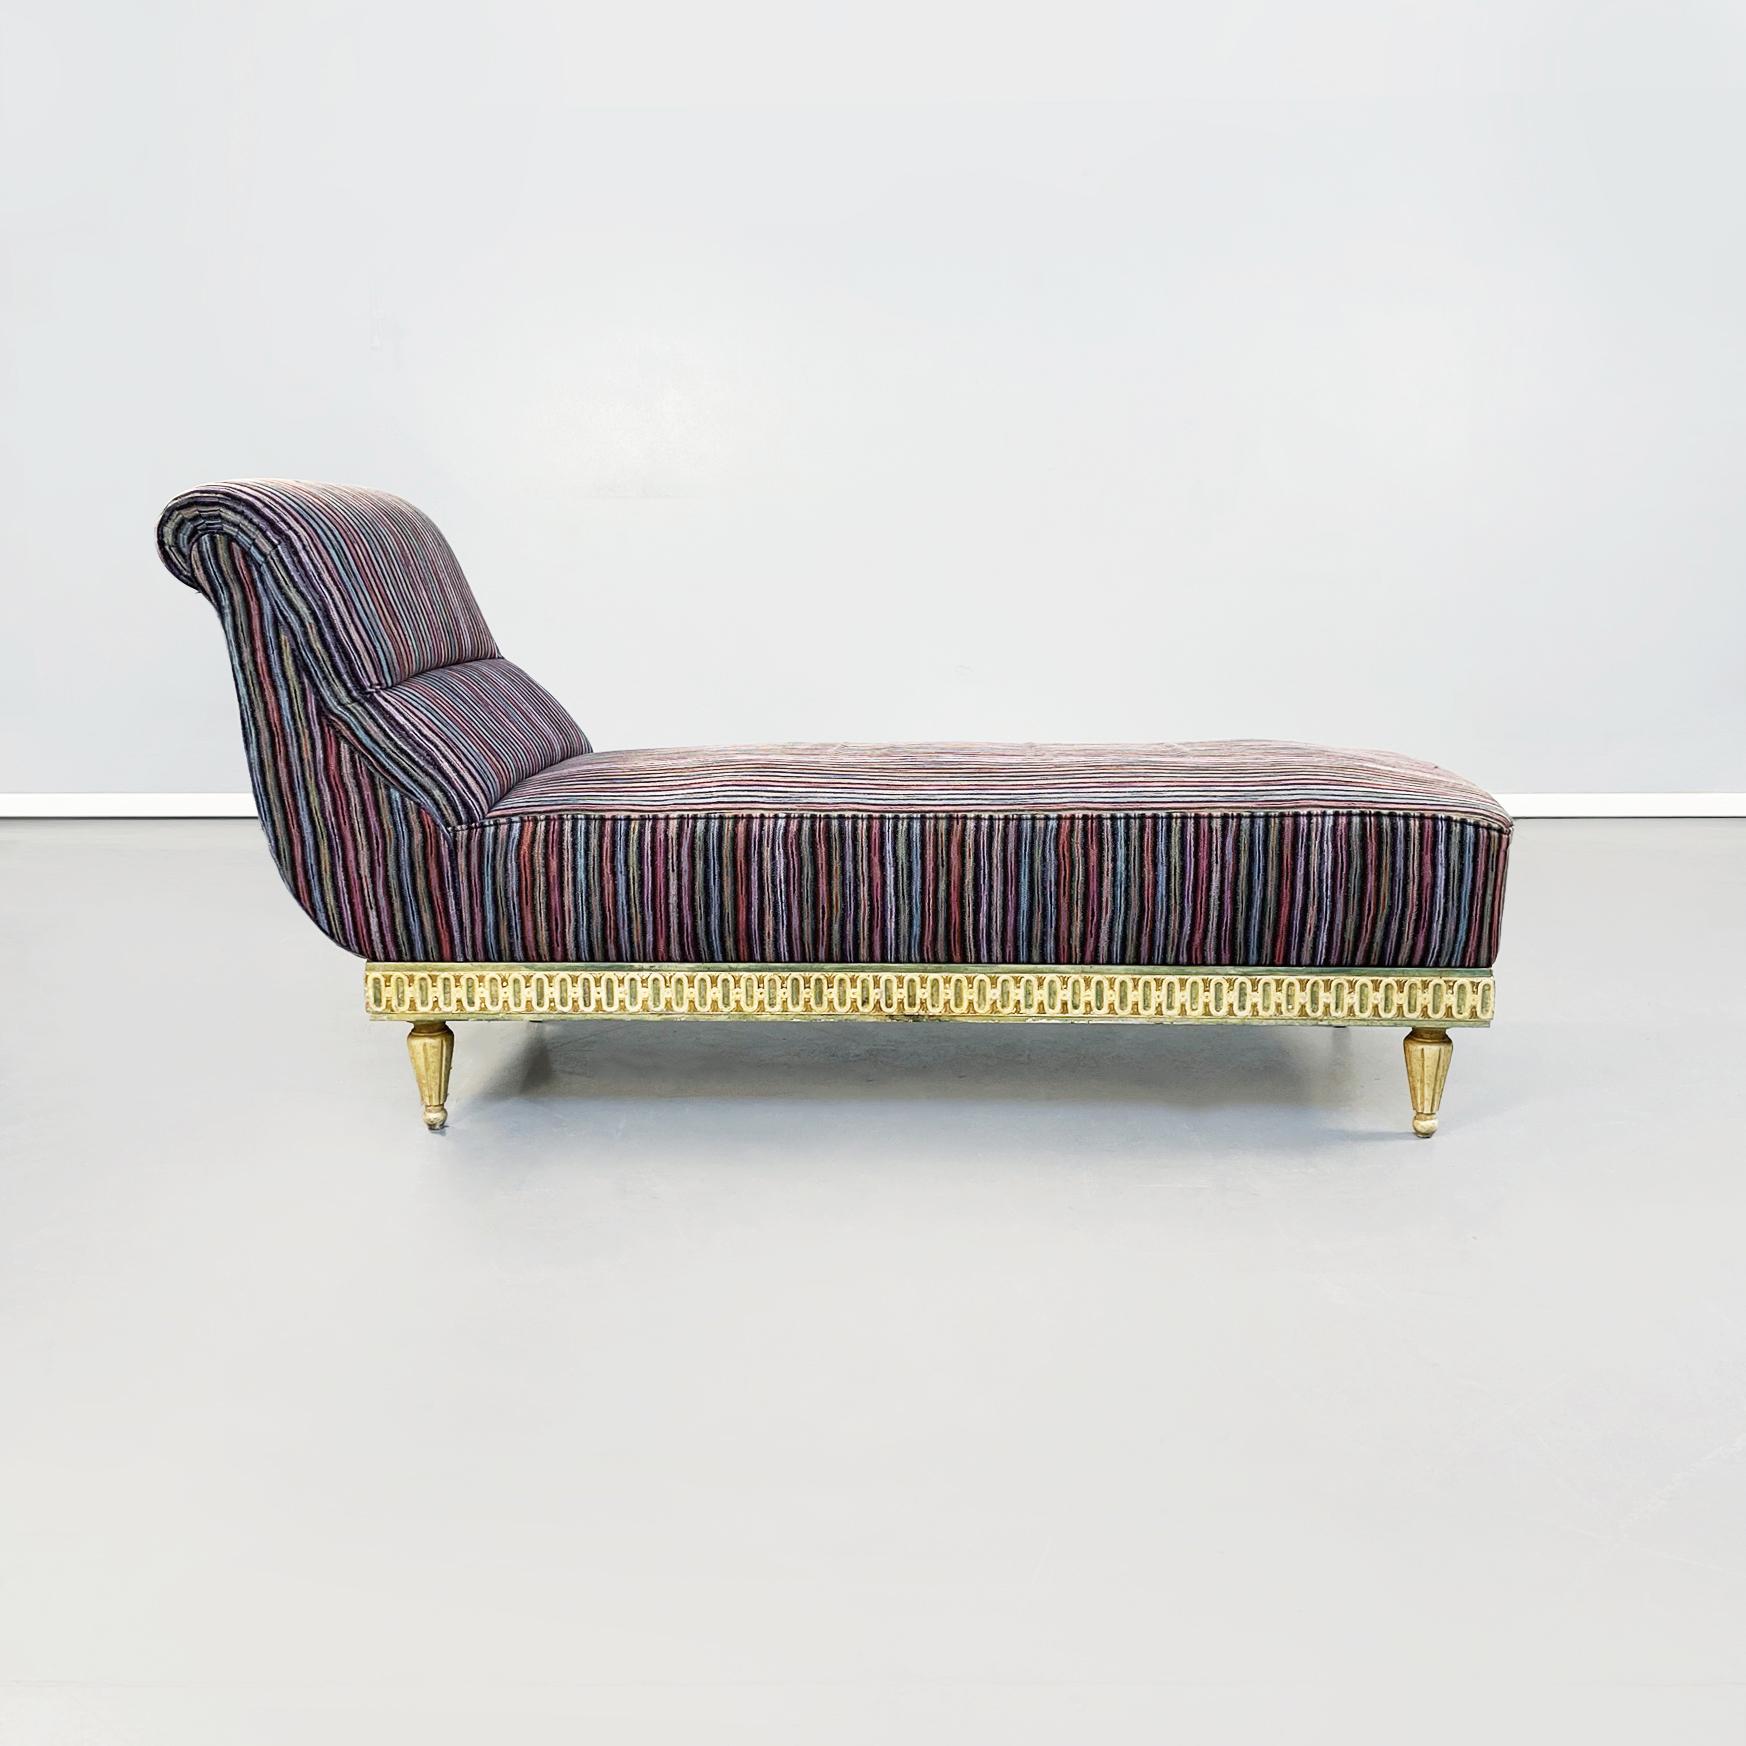 Italian mid-century Venetian style Chaise longue with Missoni striped fabric, 1950s
Chaise longue with rectangular seat and backrest upholstered and covered with multicolored striped fabric by Missoni. The underlying structure is in worked wood and